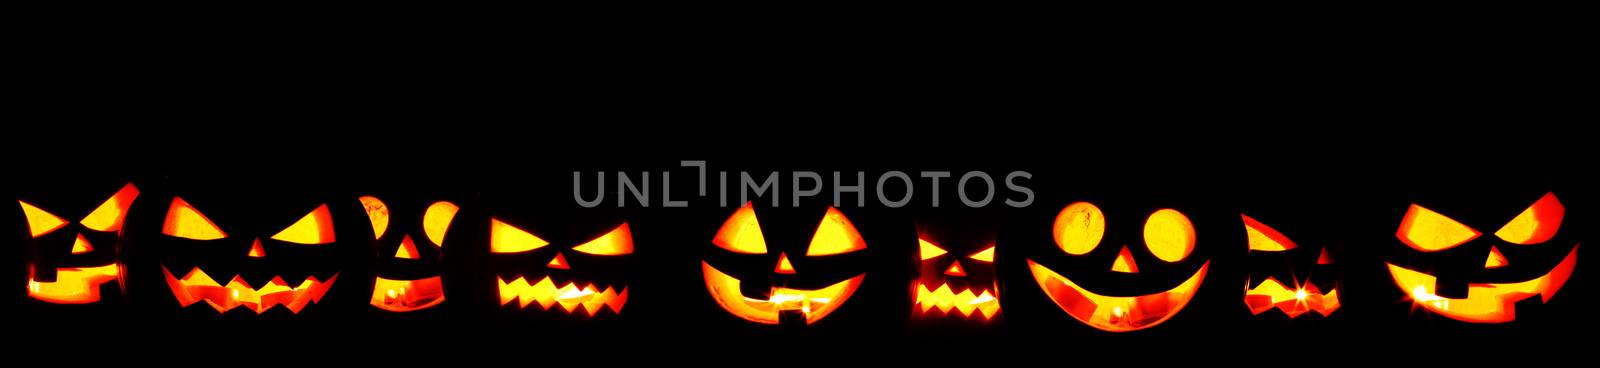 Many Halloween Pumpkin glowing faces in a row isolated on black background